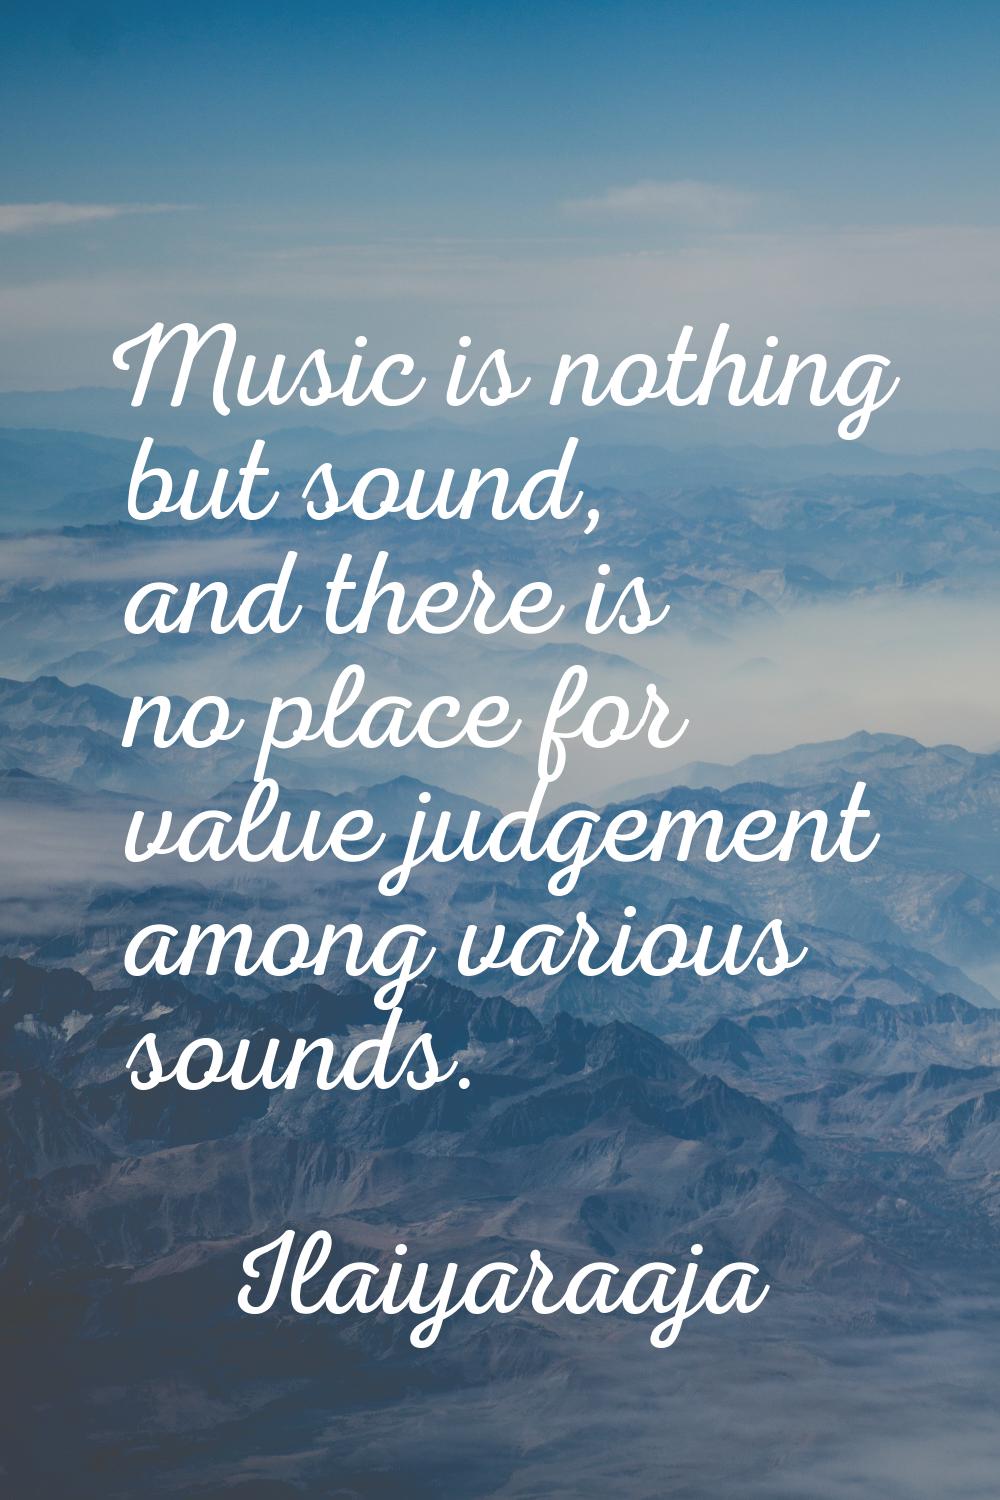 Music is nothing but sound, and there is no place for value judgement among various sounds.